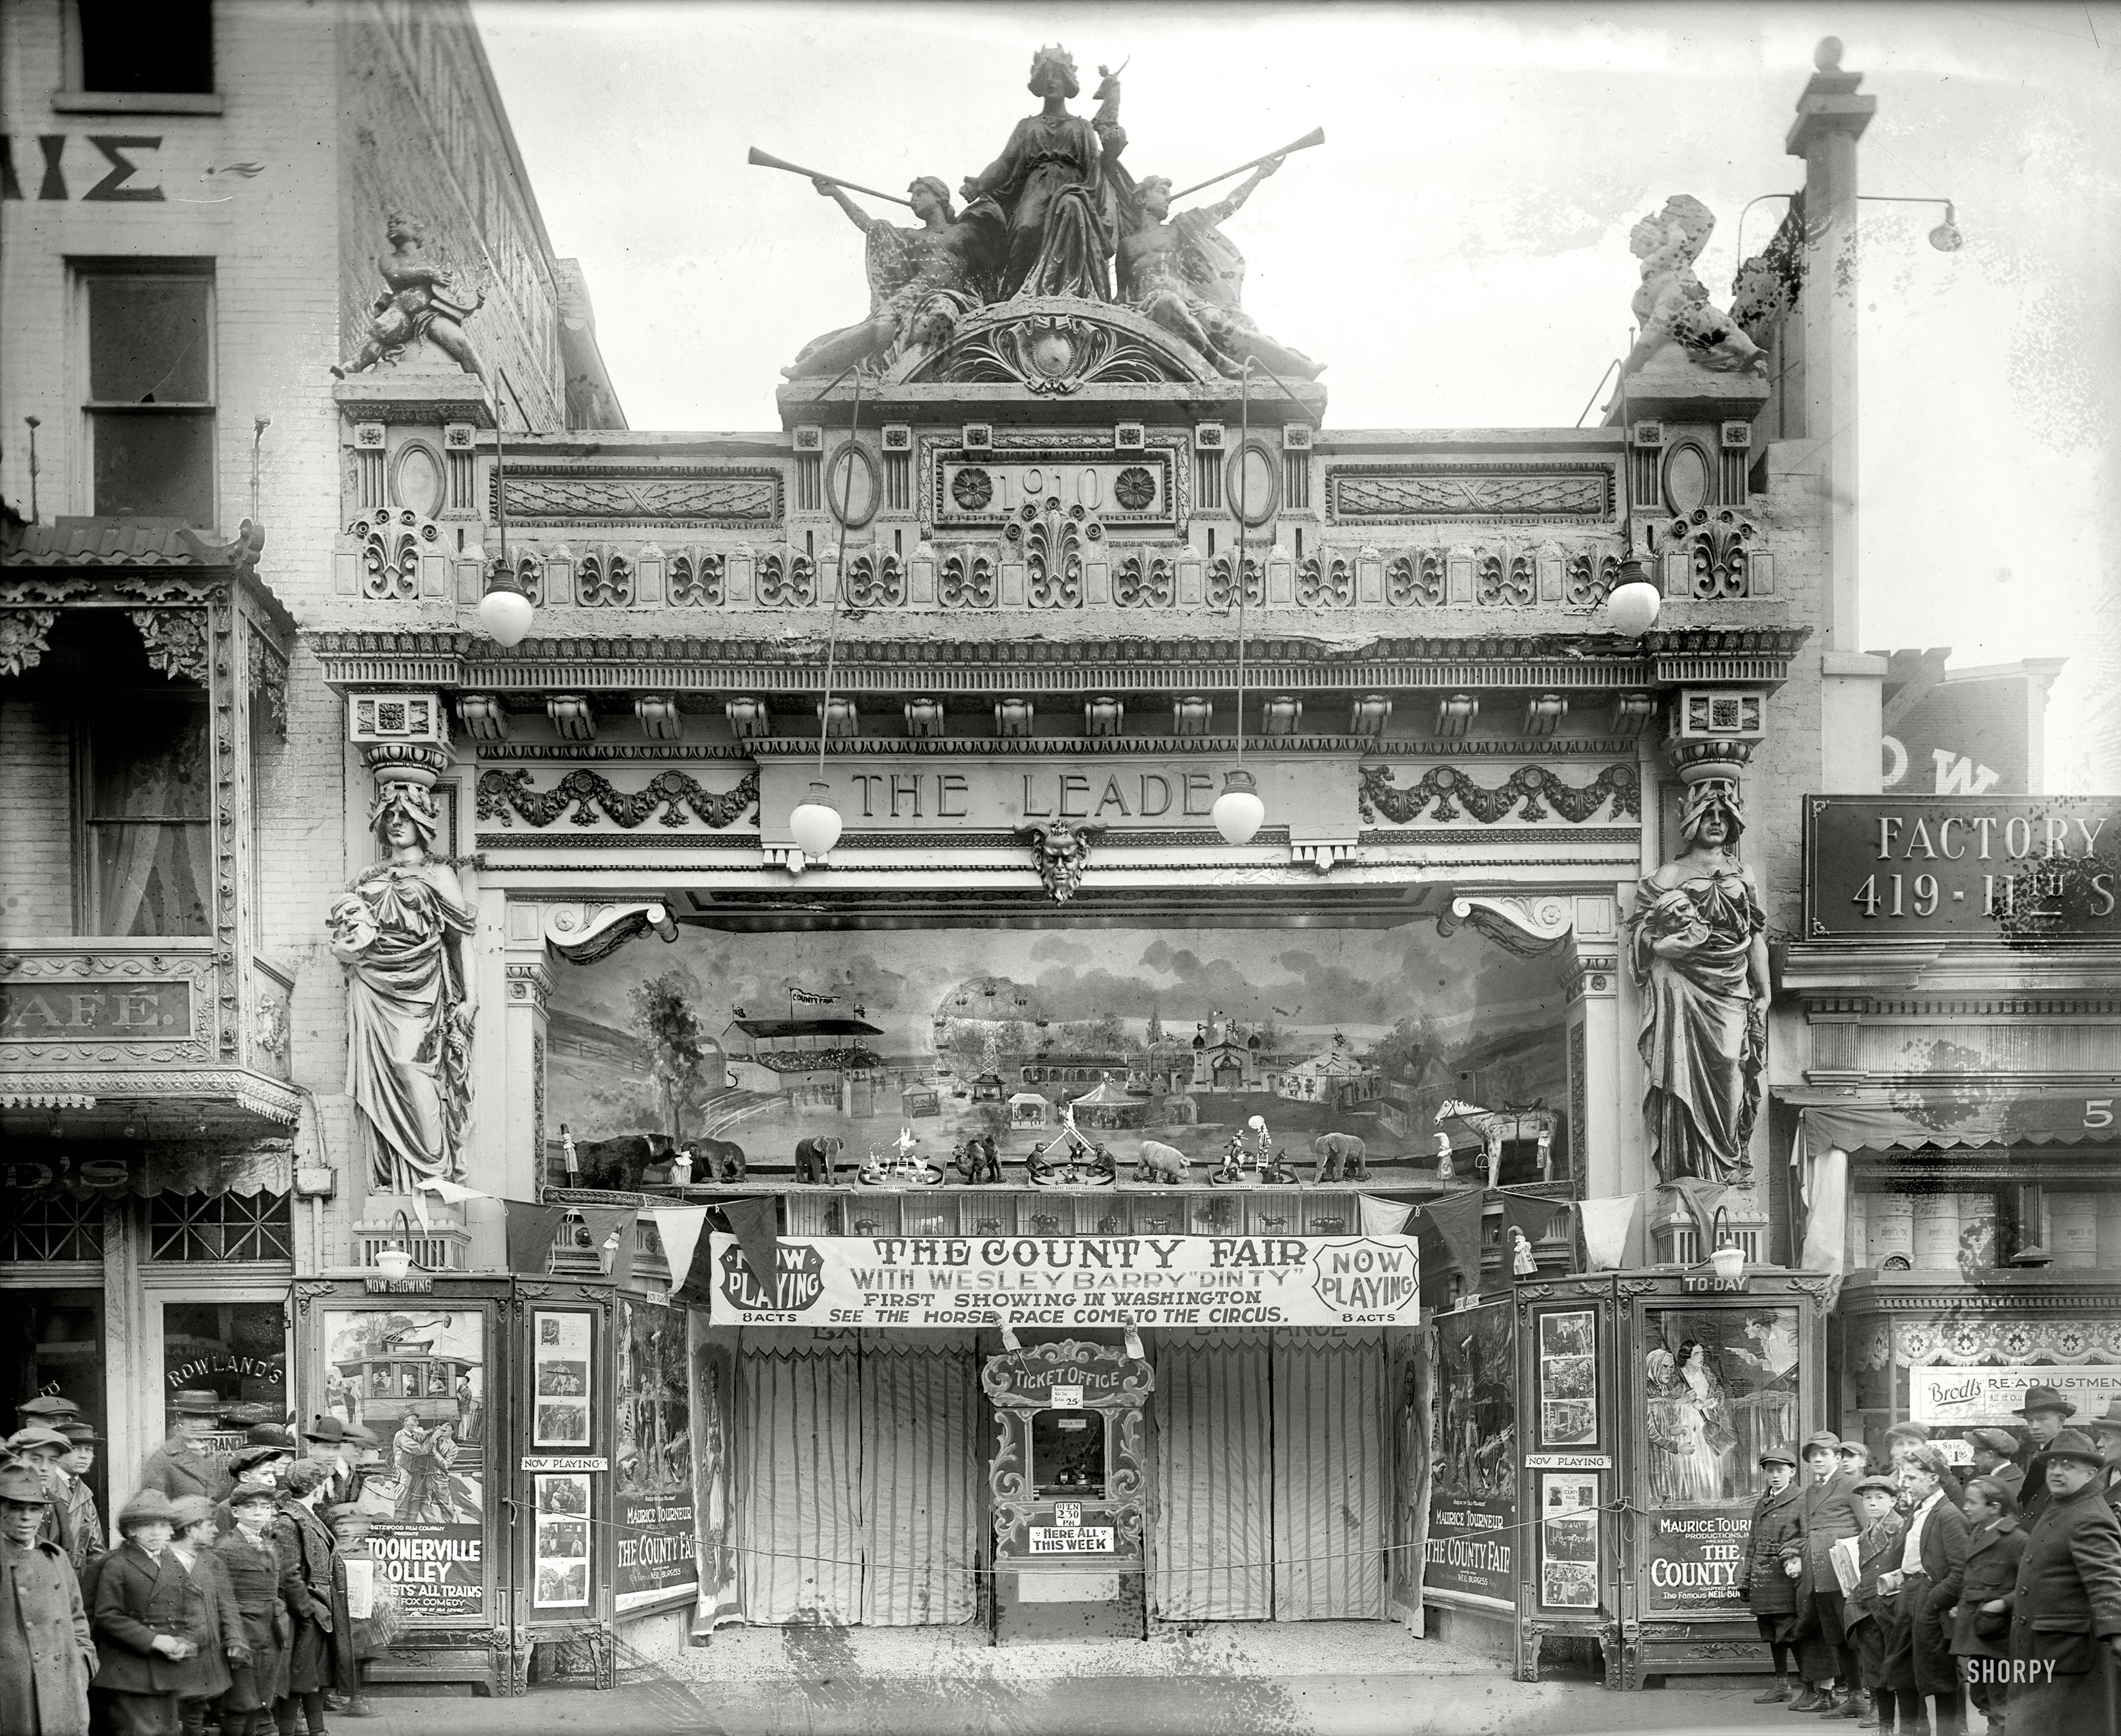 Washington, D.C., 1921. "Sidney Lust's Leader Theater." Now playing: "The County Fair," with a nifty diorama. National Photo Co. View full size.